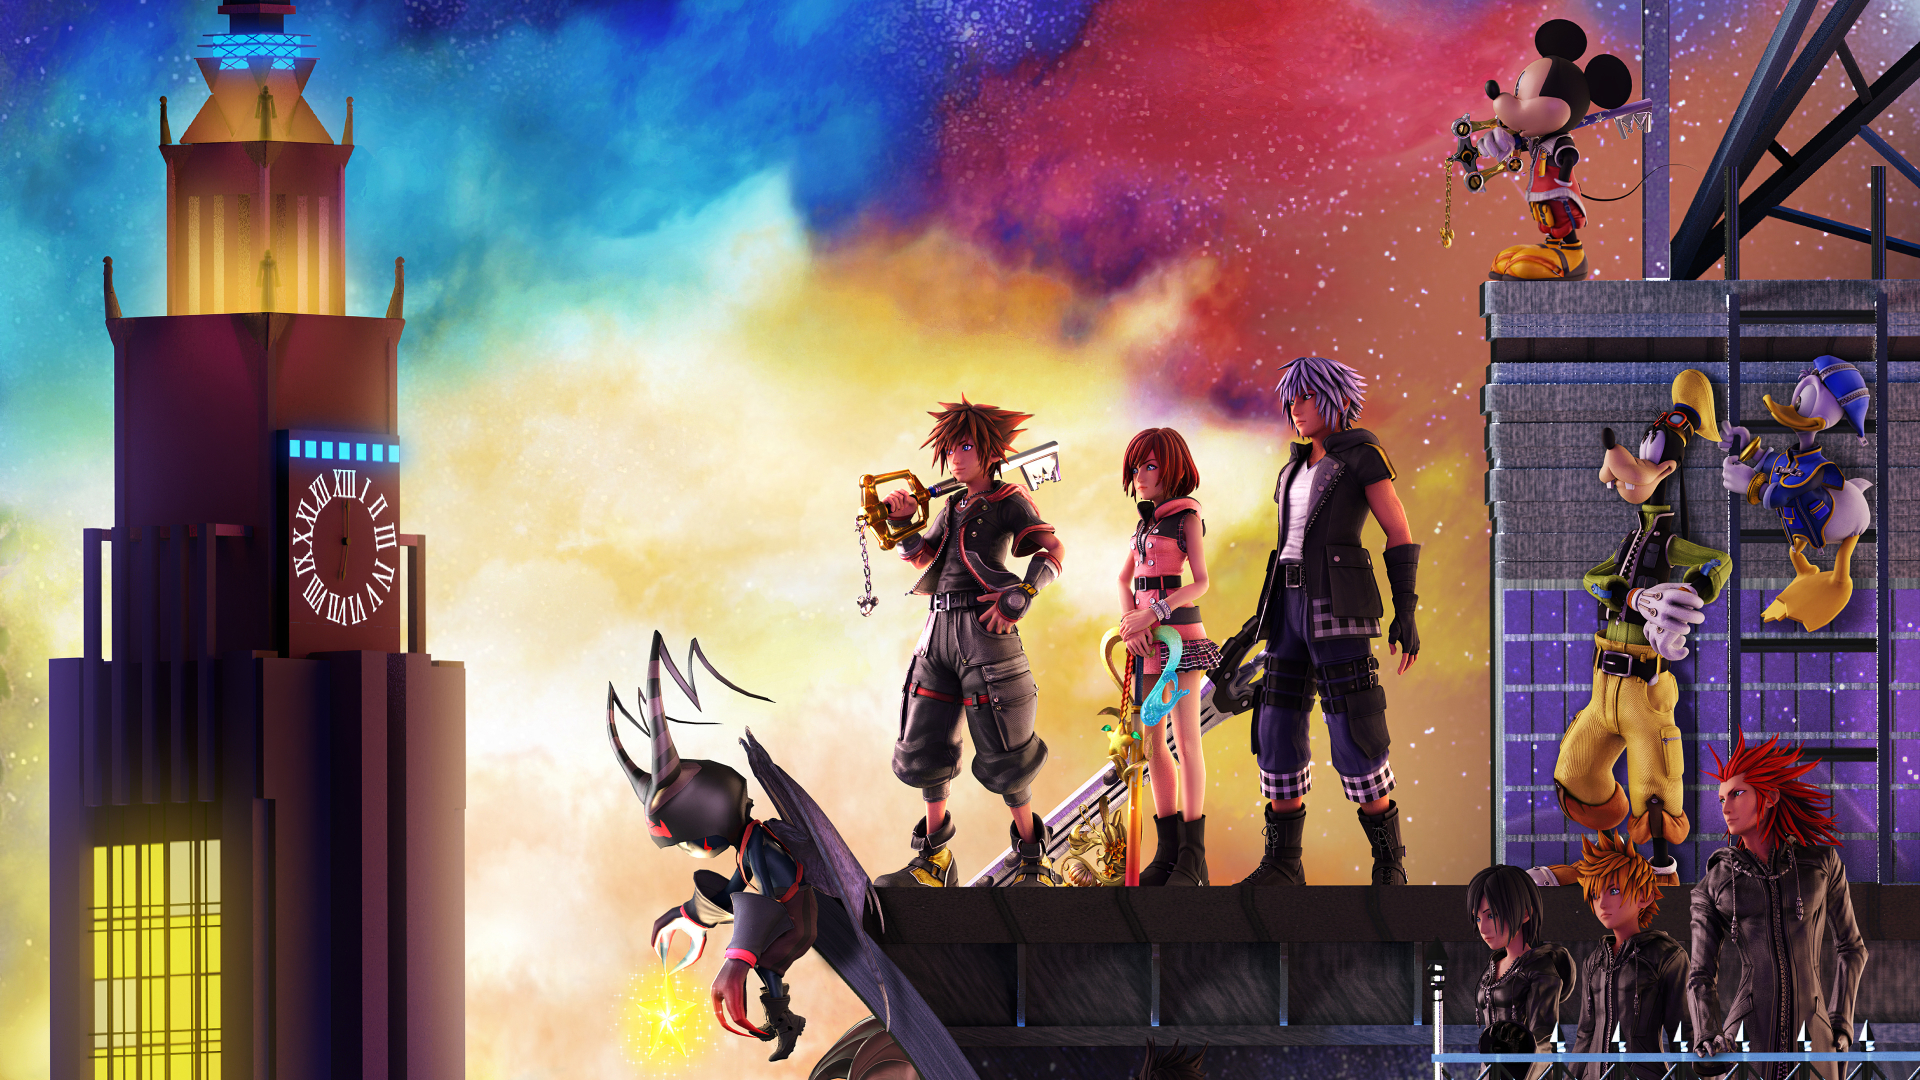 19x1080 Kingdom Hearts 3 1080p Laptop Full Hd Wallpaper Hd Games 4k Wallpapers Images Photos And Background